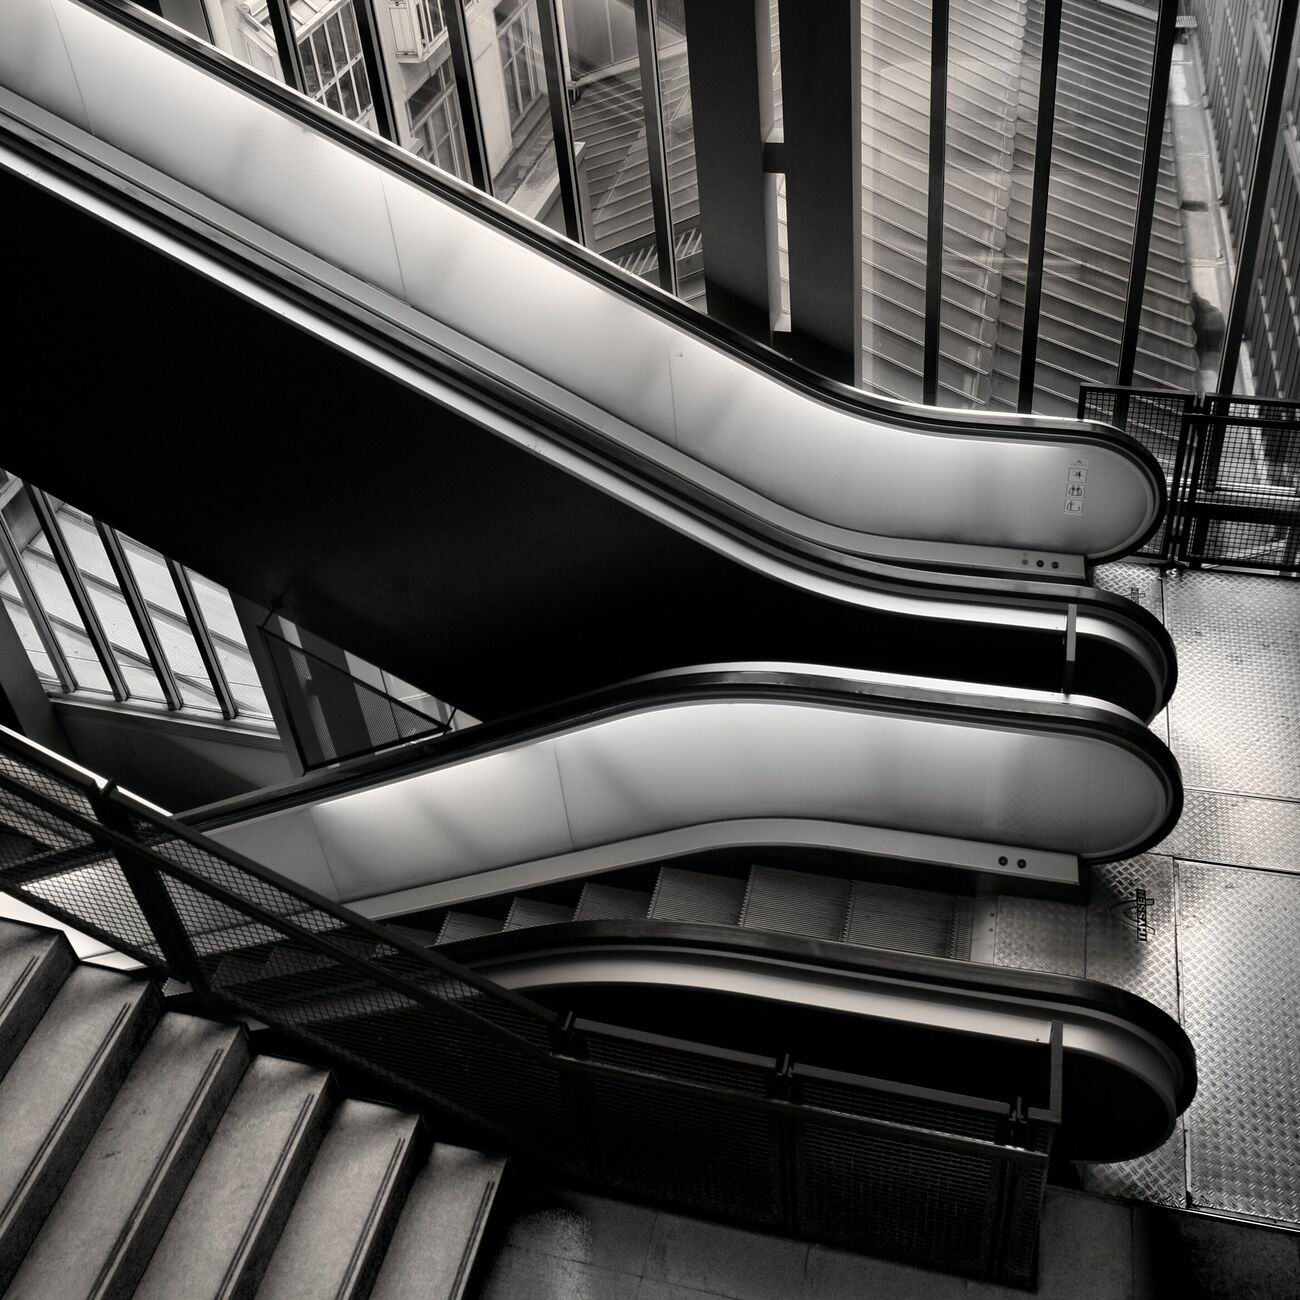 Photography 15.7 x 15.7 in, Orsay museum escalator. Ref-564-12 - Denis Olivier Art Photography